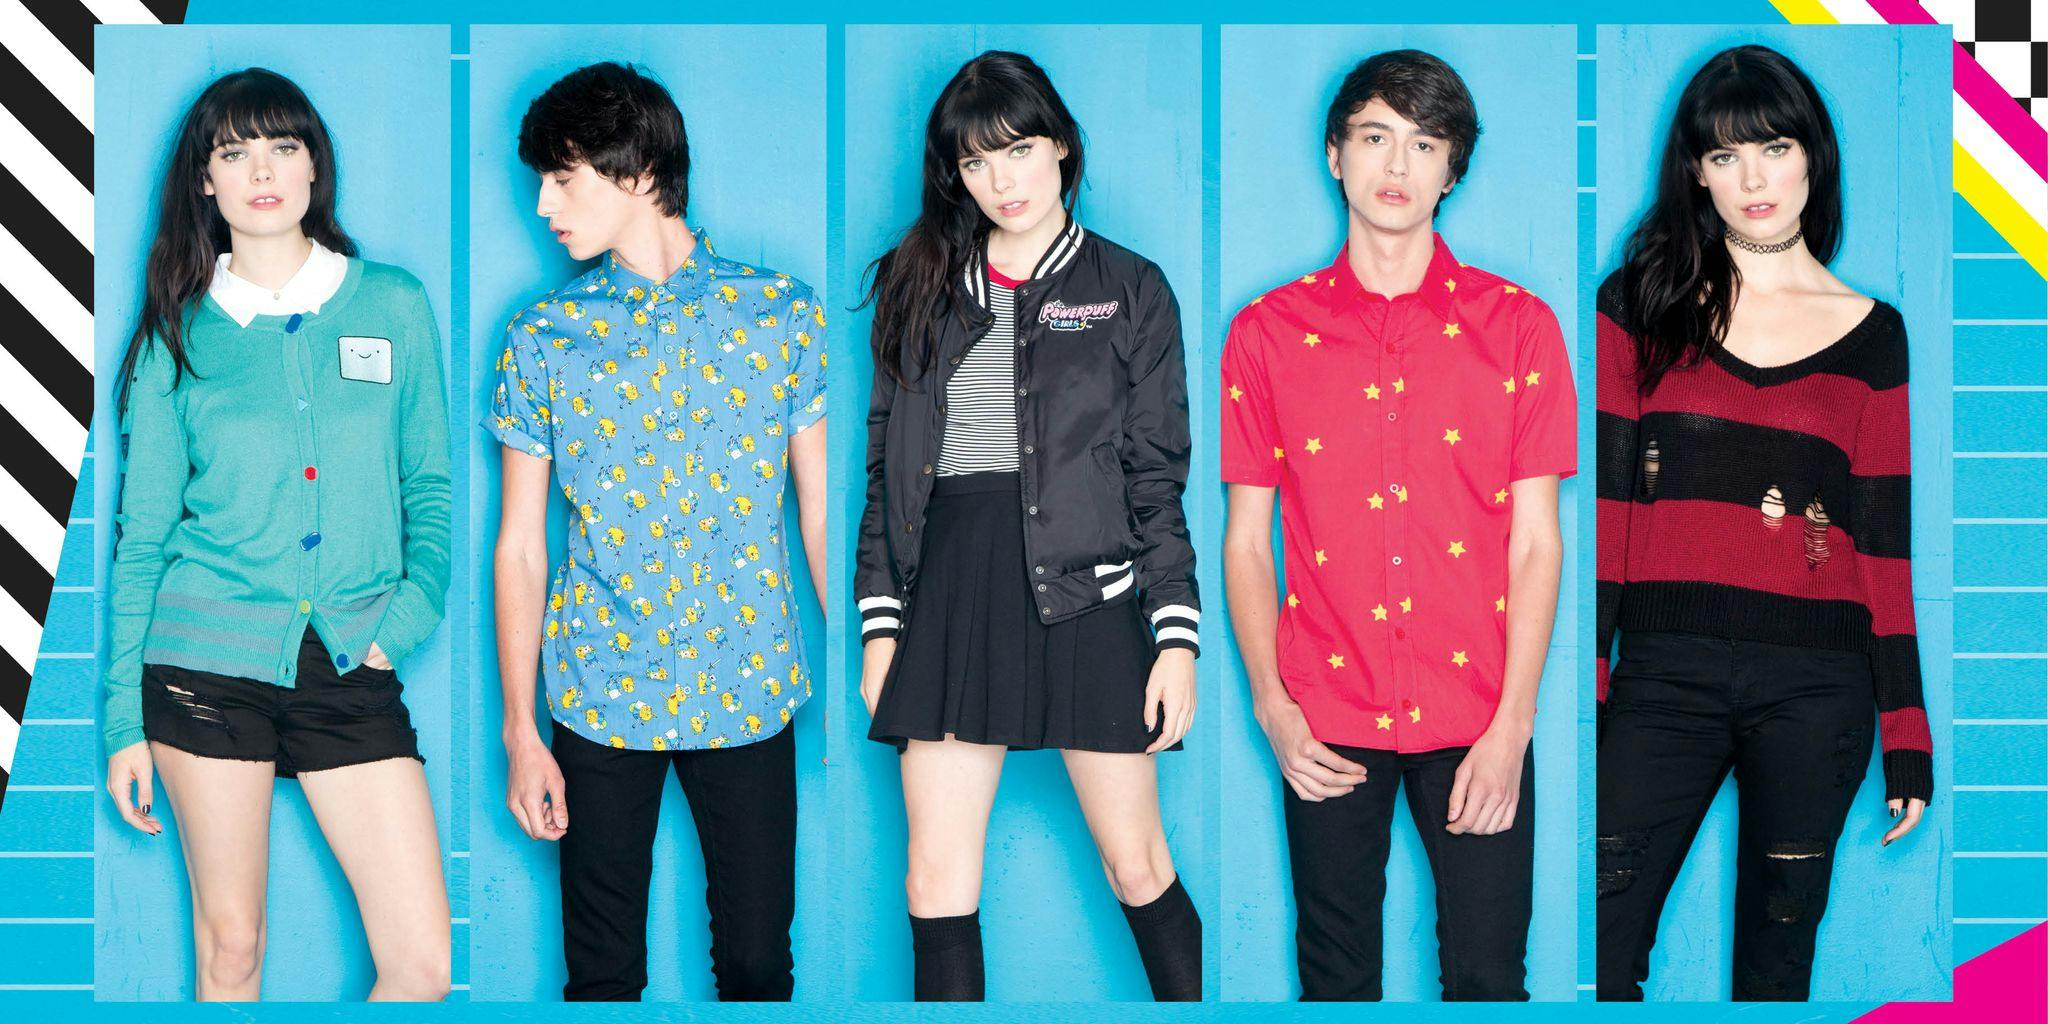 Hot Topic Releases a New Cartoon Network Fashion Collection